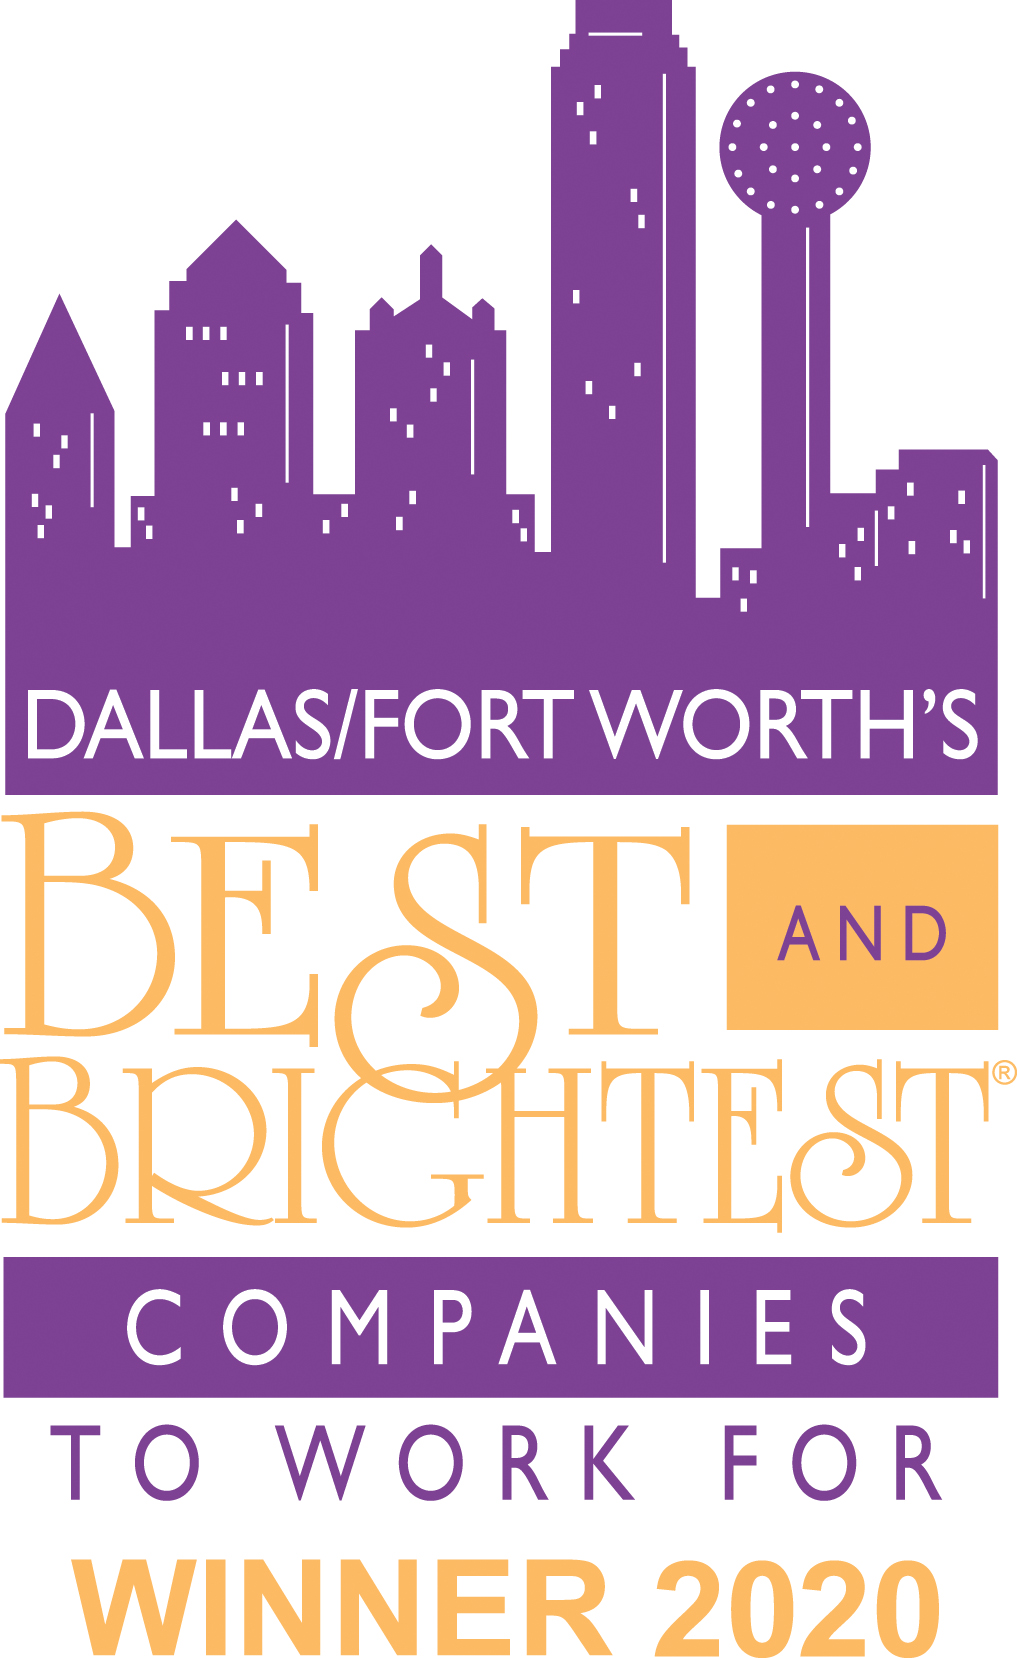 Proliant in Dallas - 2020 Winner for Best and Brightest Companies to Work For!